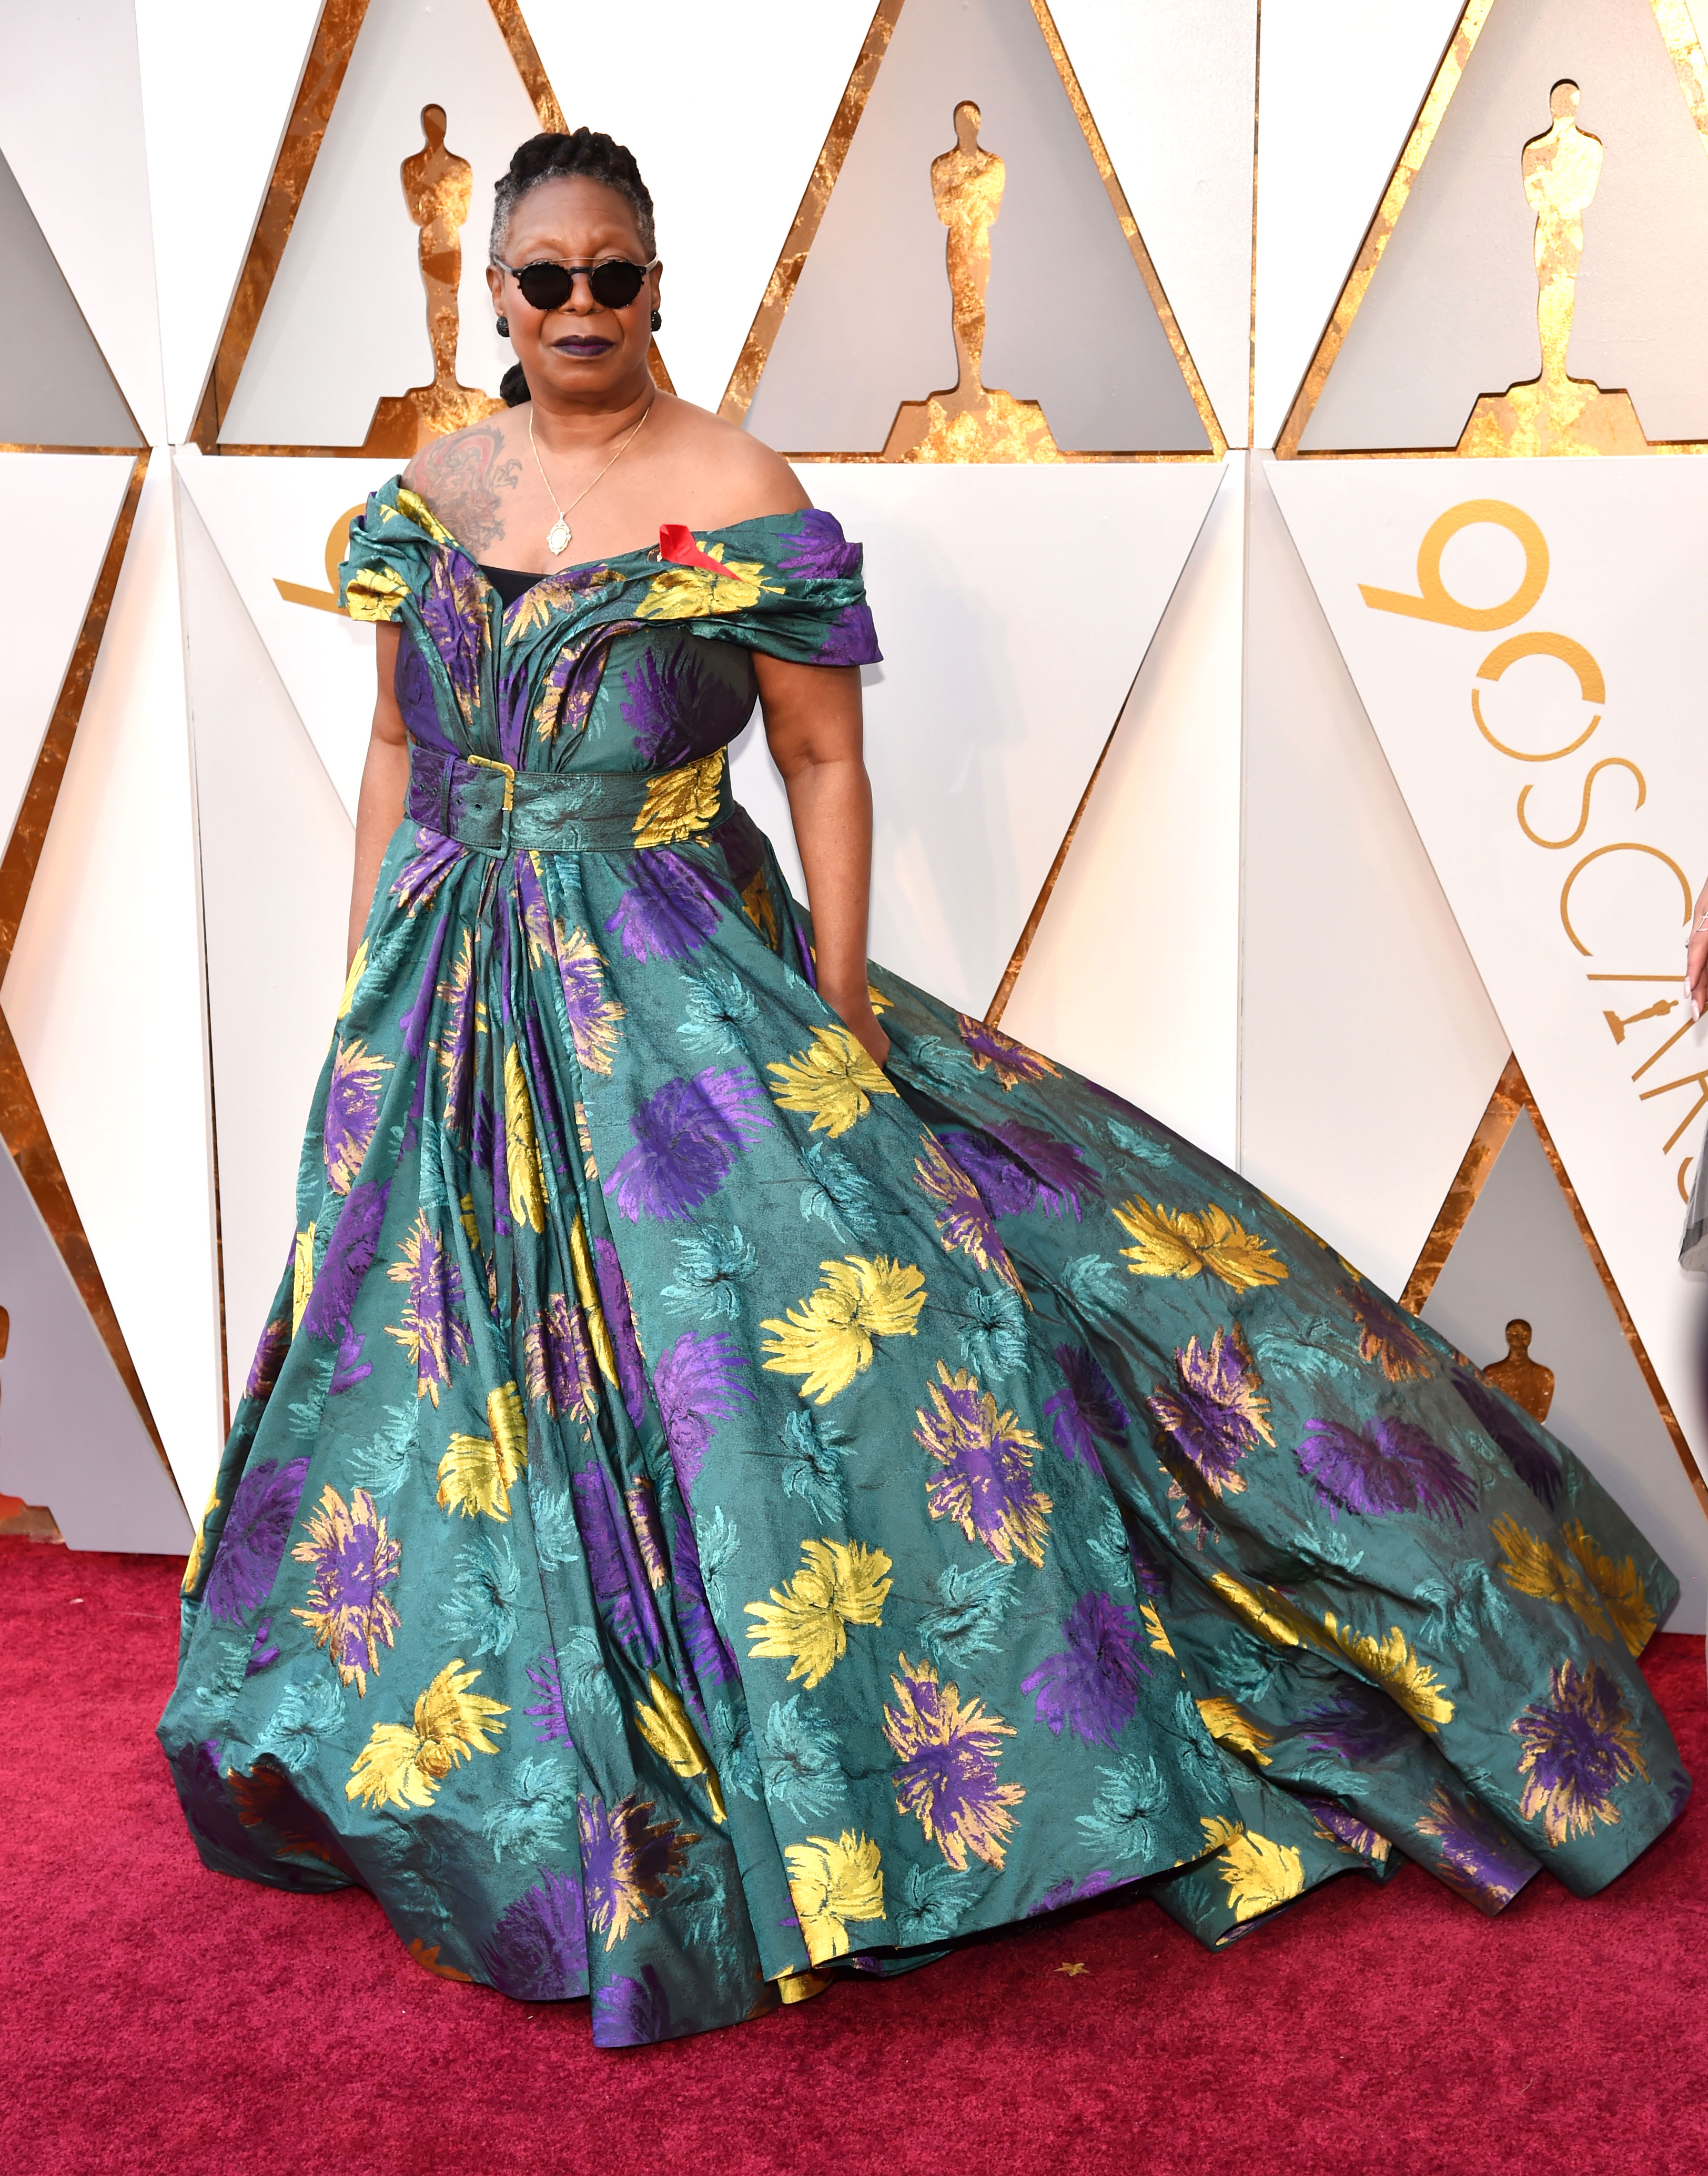 Oscars 2018 Red Carpet Fashion: See Stars Dresses, Gowns